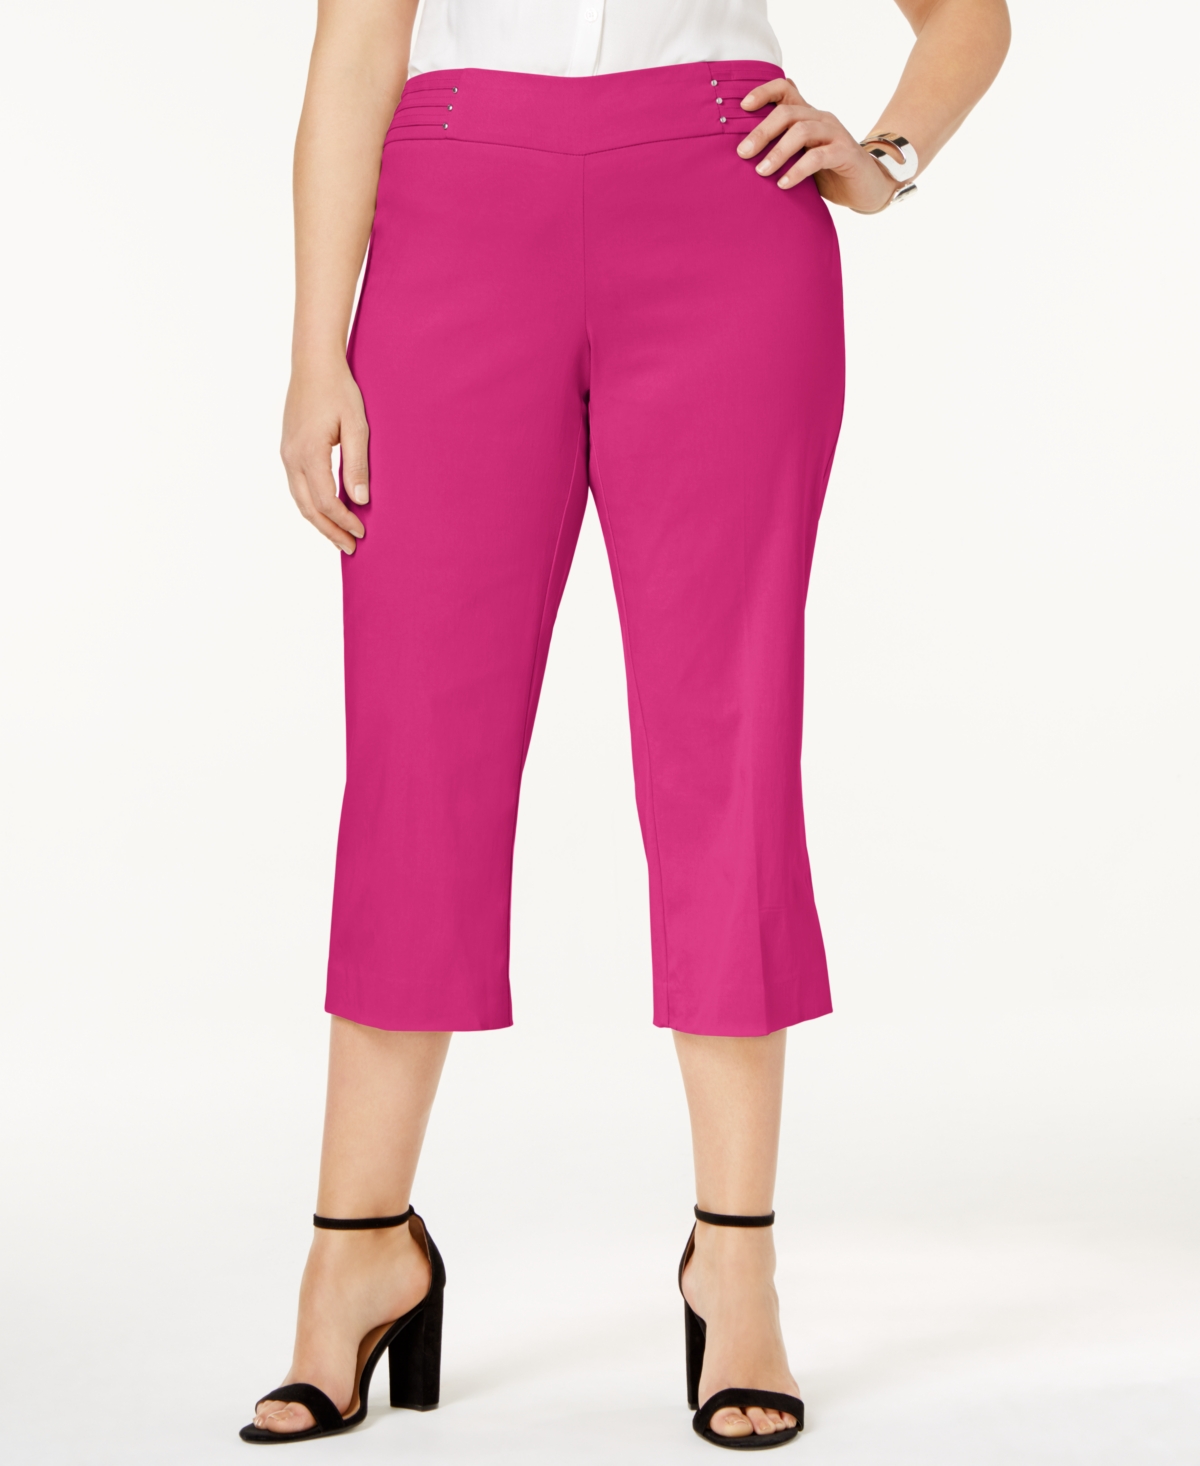 Jm Collection Plus Size Tummy Control Pull-On Capri Pants, Created for  Macy's